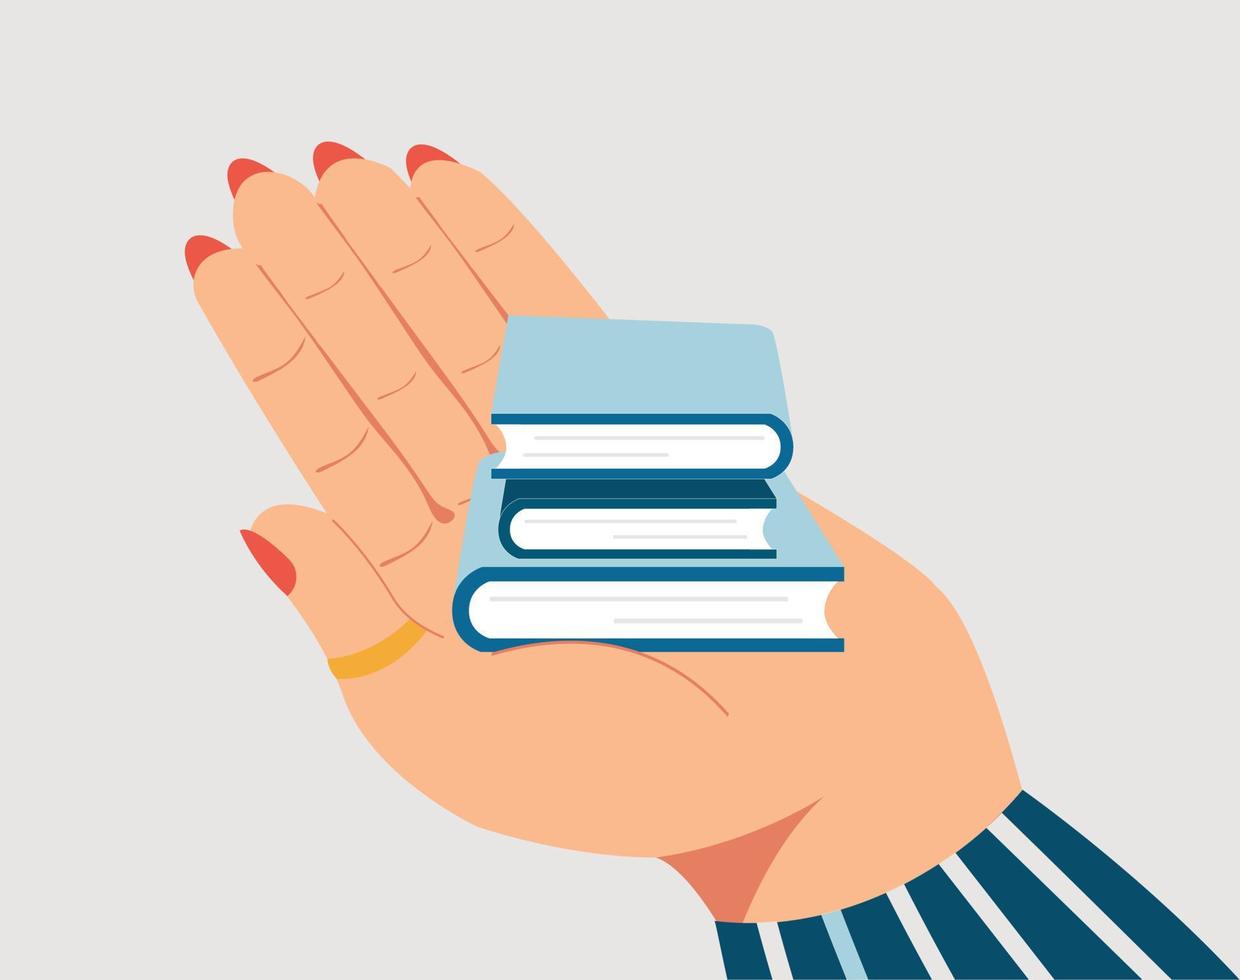 Big hand holding a stack of books. Isolated illustration of world Book Day and international Library Day. Concept of Learning, Education and Literacy. Vector stock